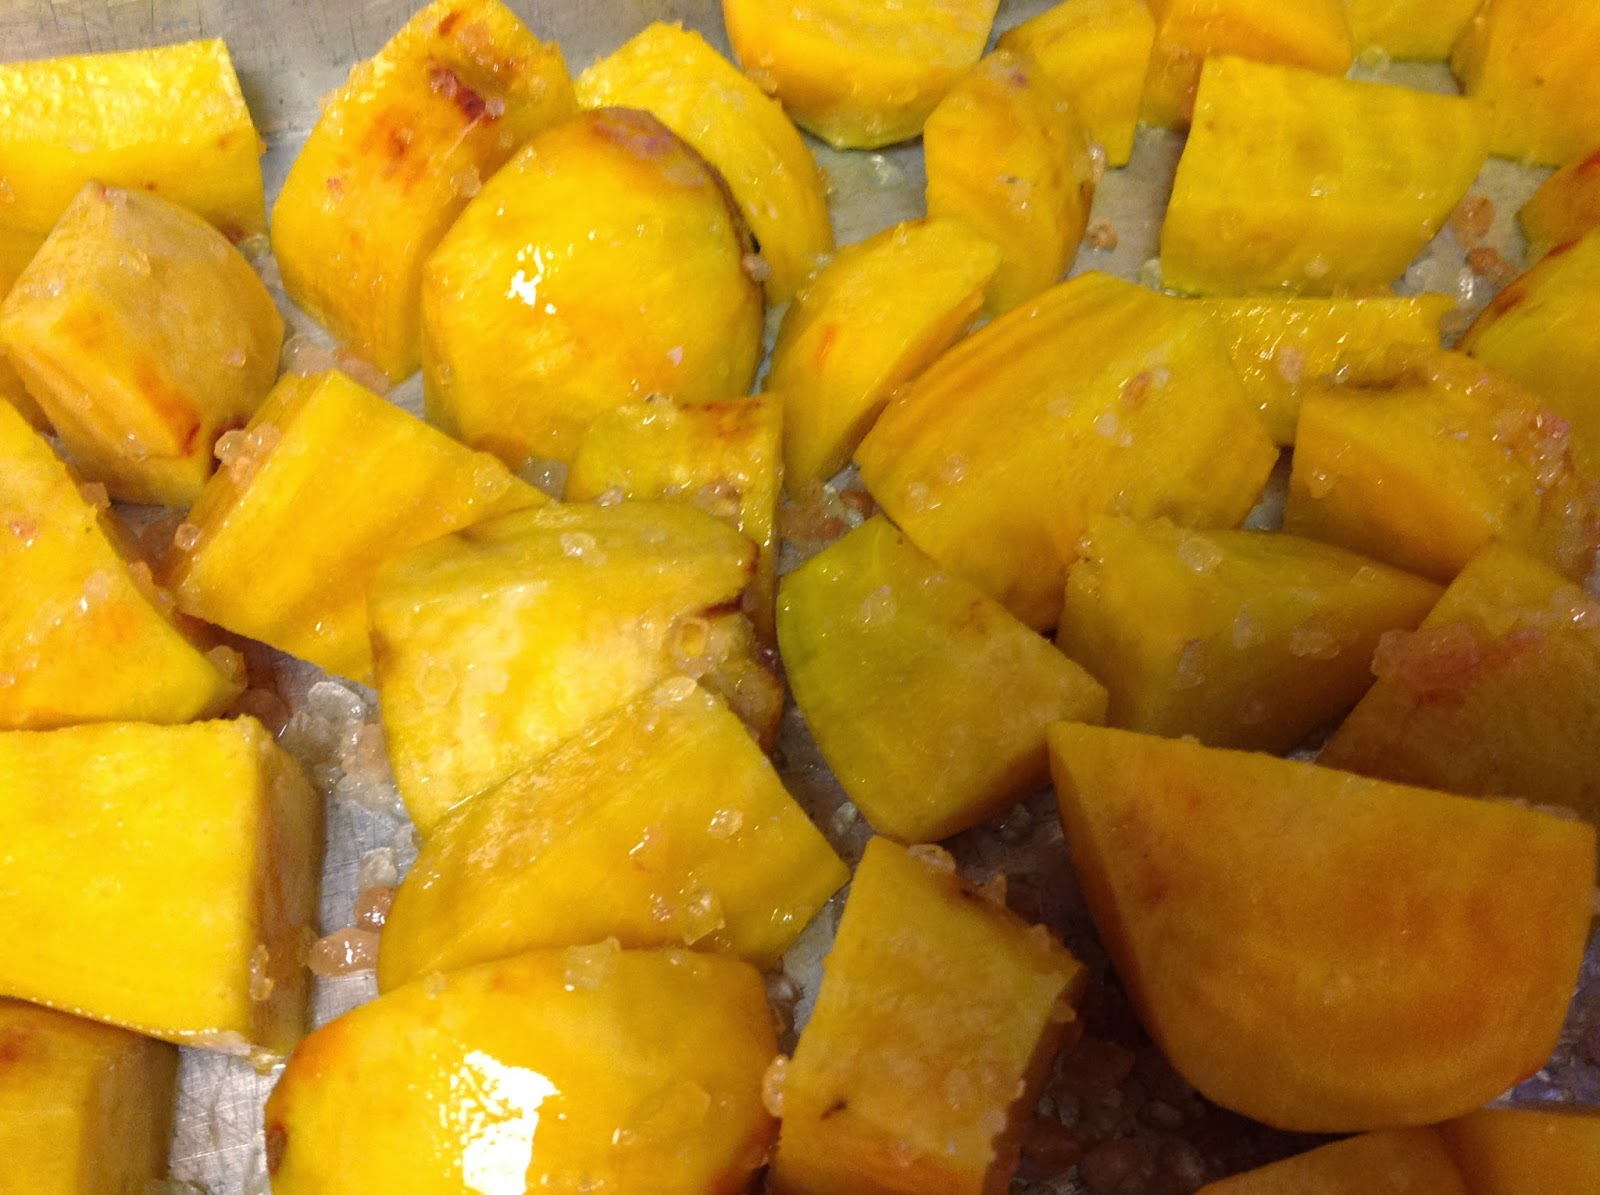 The Sunshine Is In: How To Cook Golden Beets